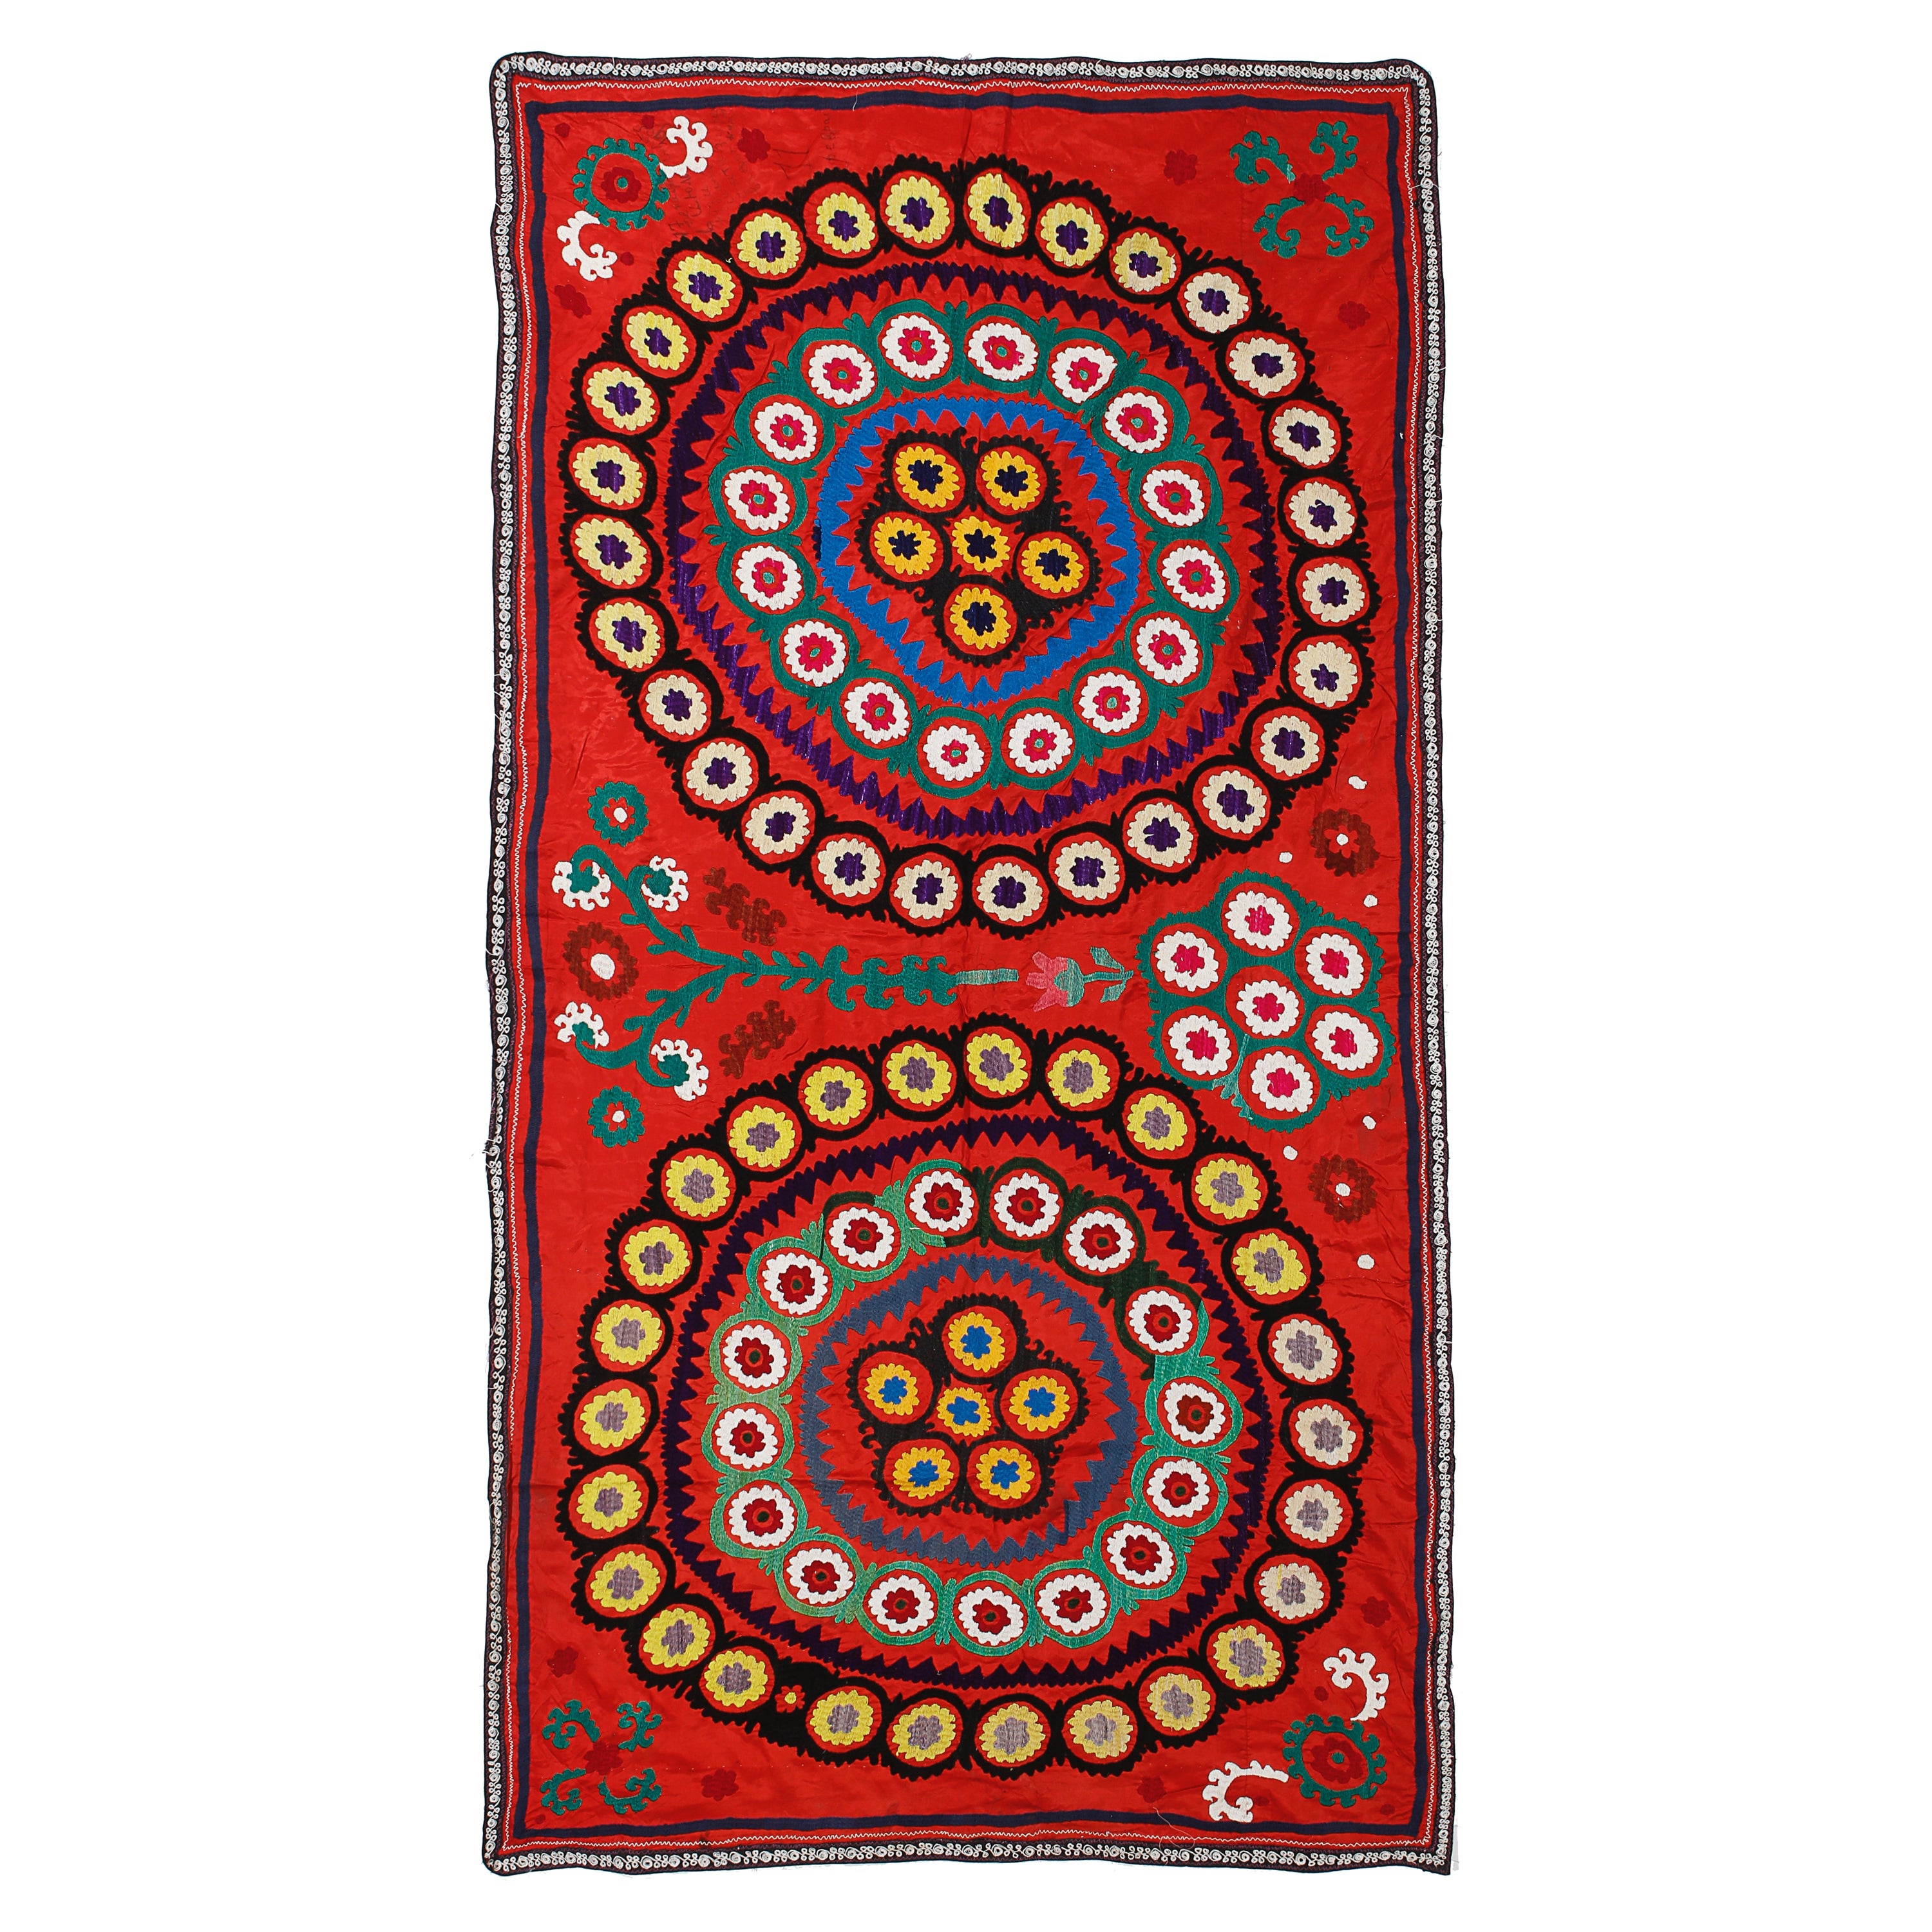 3.8x7.3 Ft Red Wall Decor, Silk Embroidered Wall Hanging, Needlework Table Cover (Décoration murale en soie)